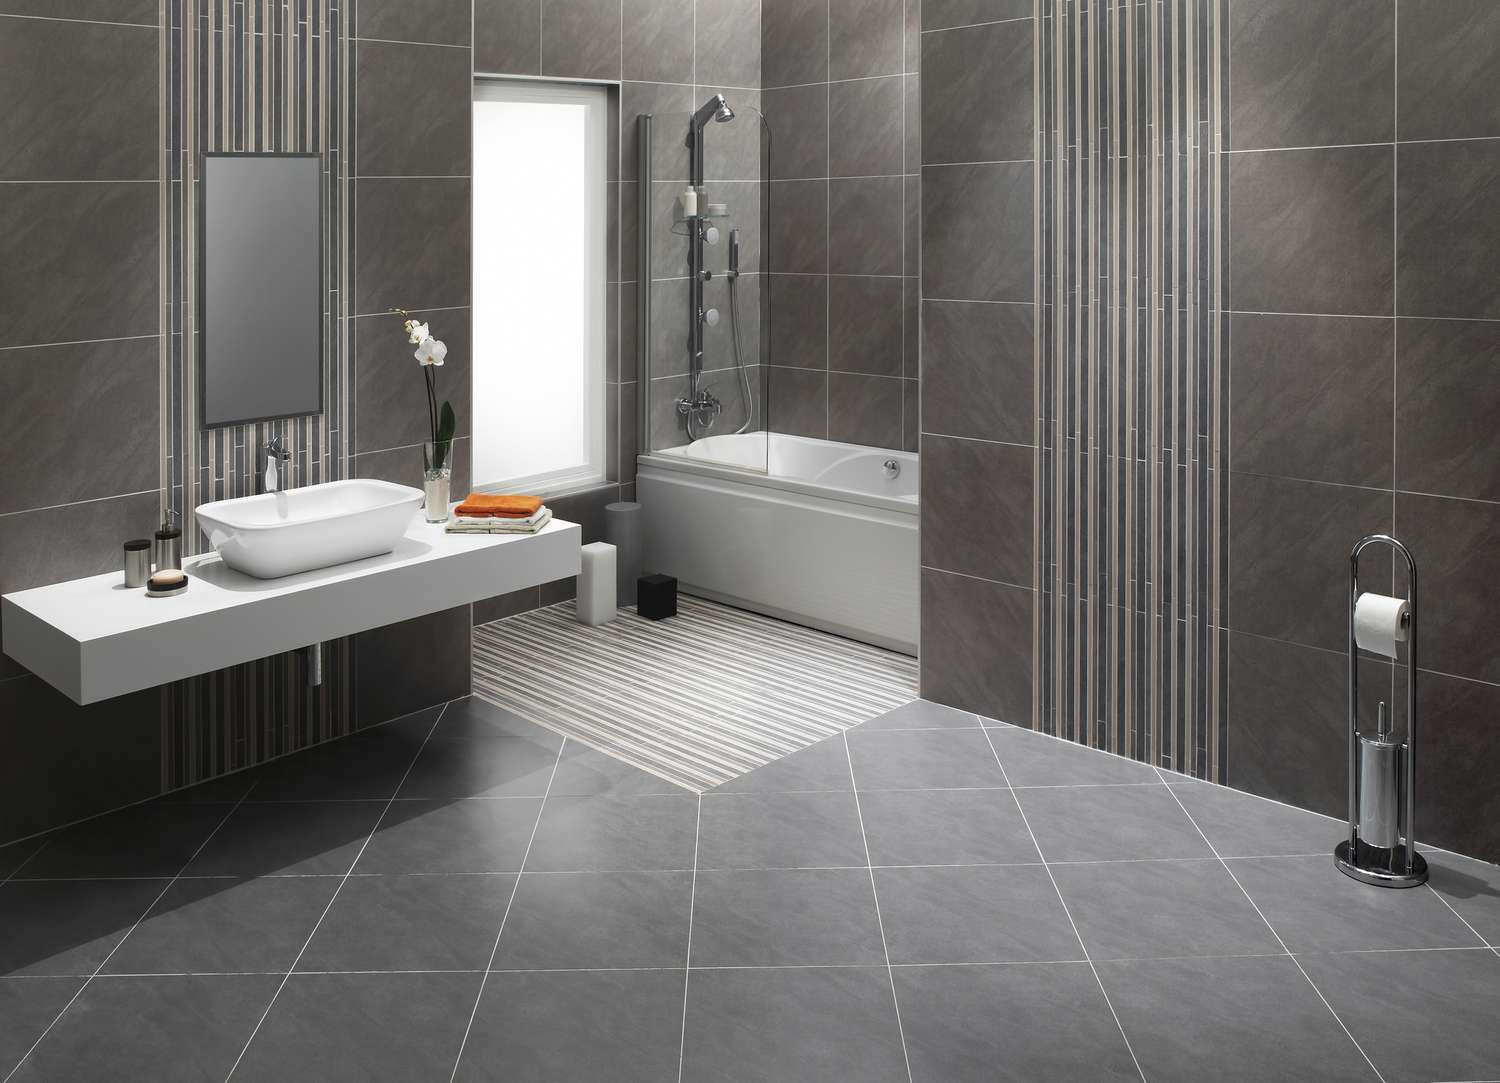 Modern Bathrooms Focus on Both Form And Function, With a Range of Options